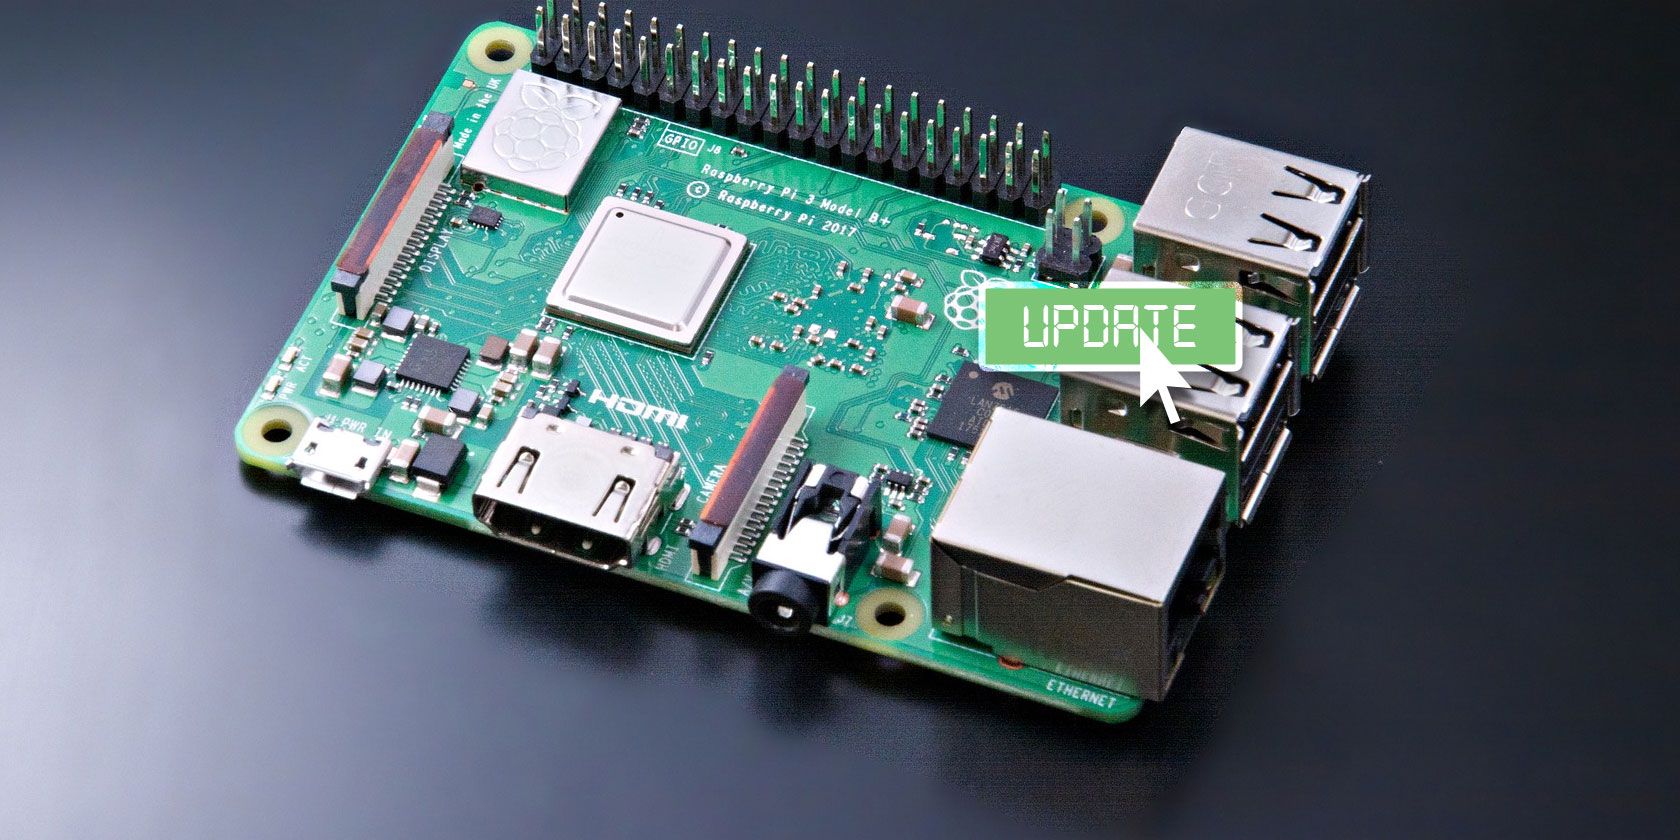 How to Update Your Raspberry Pi to the Latest Raspbian OS ... - 